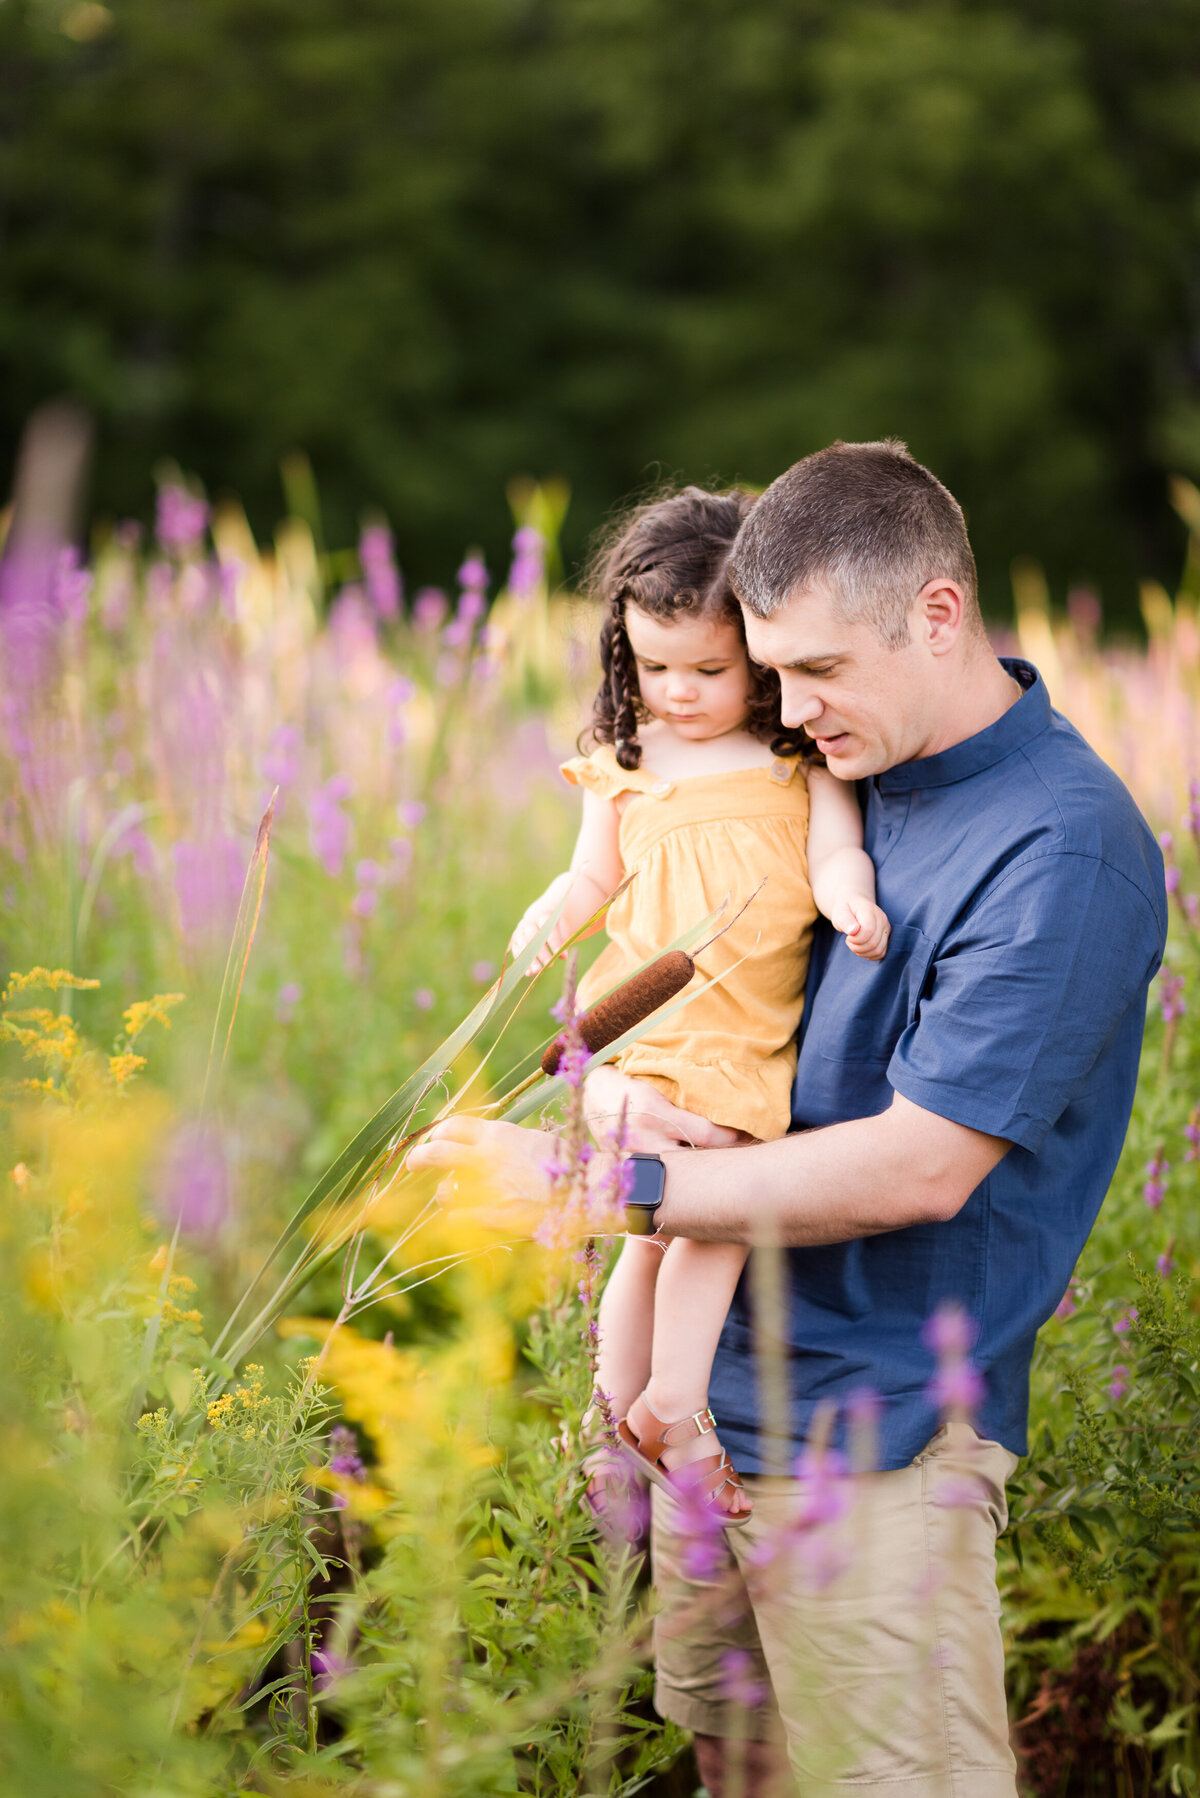 Boston-family-photographer-bella-wang-photography-Lifestyle-session-outdoor-wildflower-41